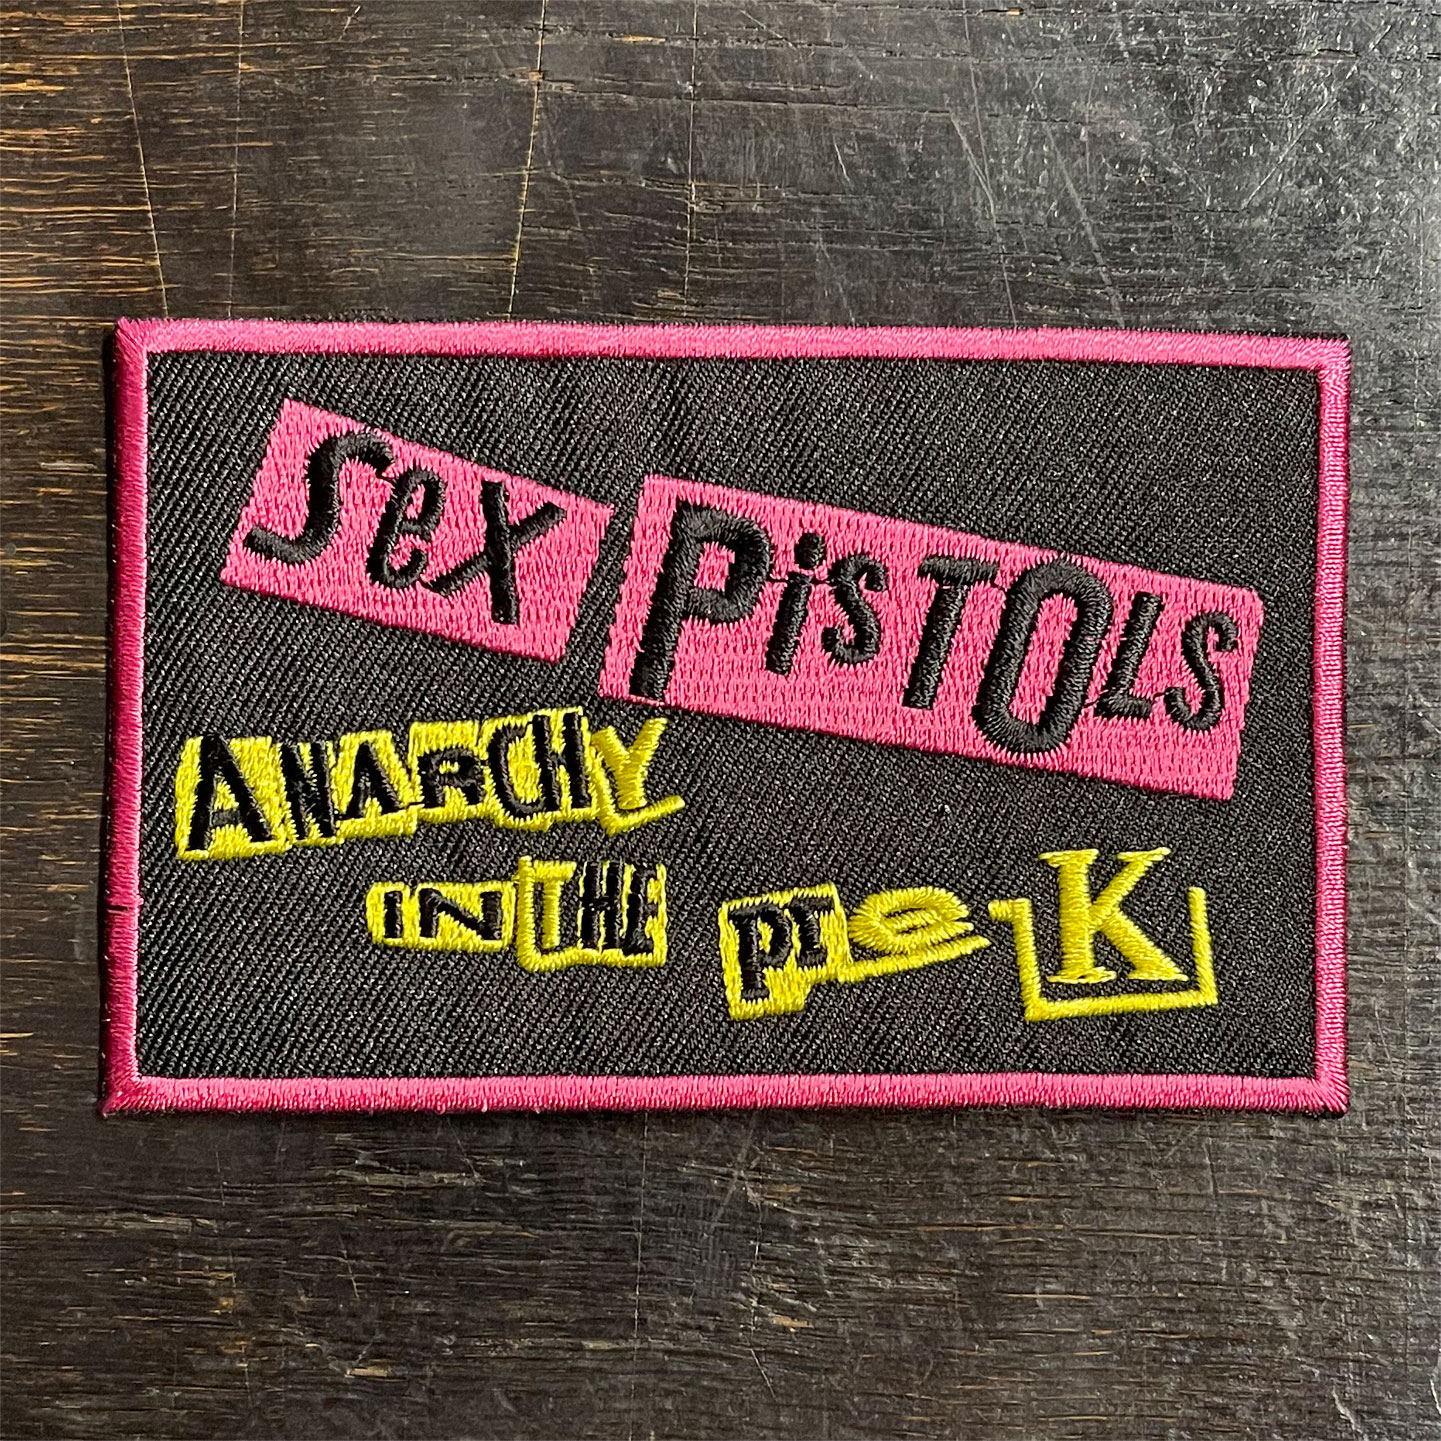 SEX PISTOLS 刺繍ワッペン ANARCHY IN THE pre-K